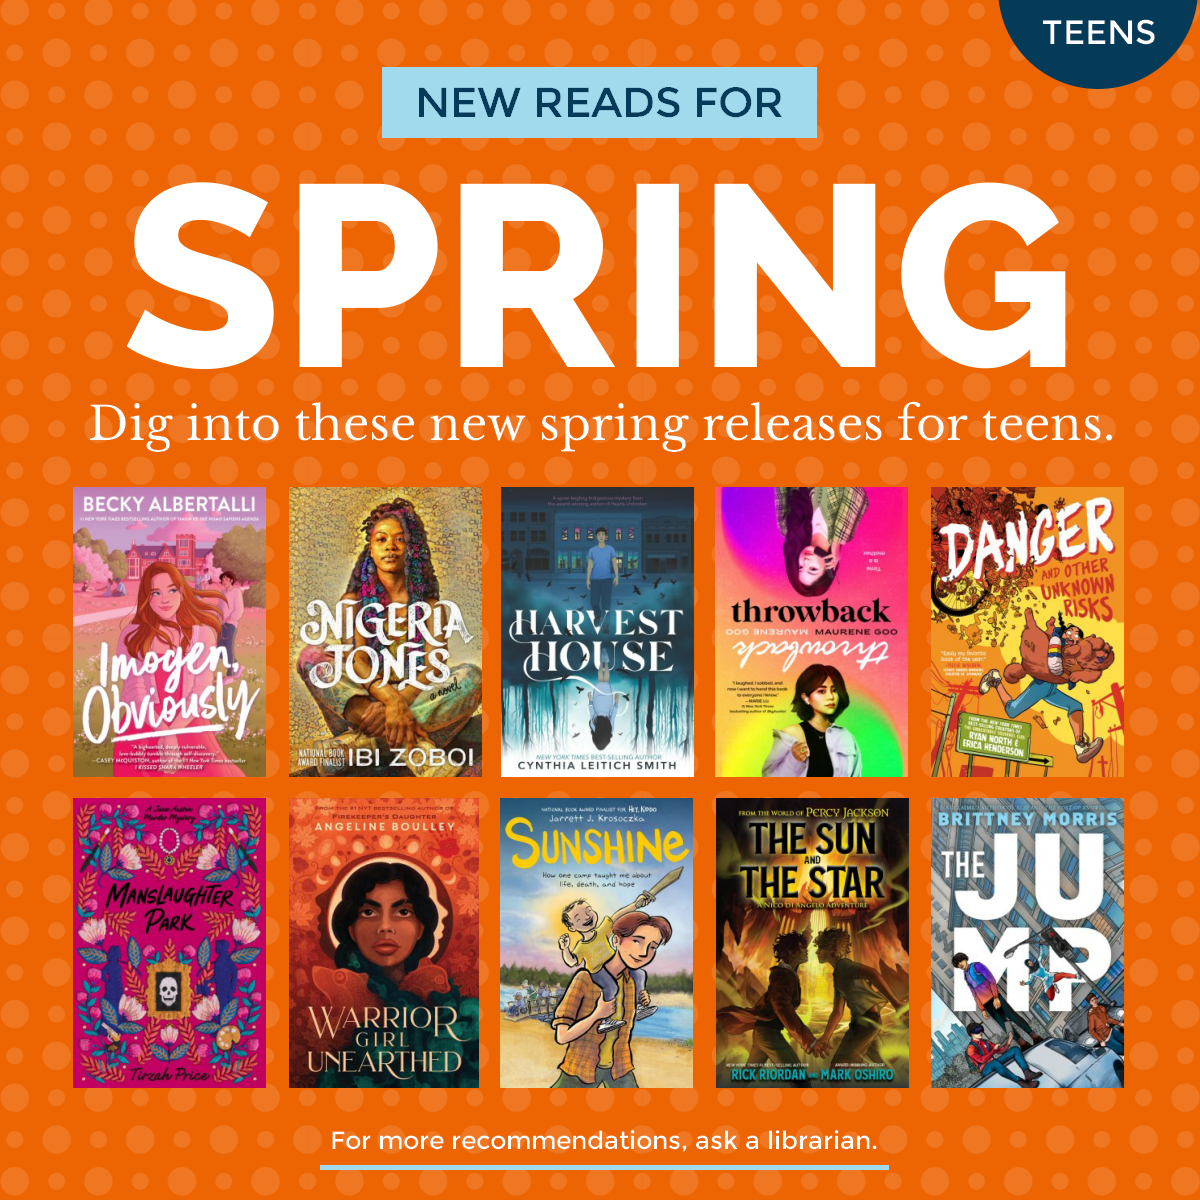 Text reads, "Teens, New reads for spring. Dig into these new spring releases for teens. For more recommendations, ask a librarian."